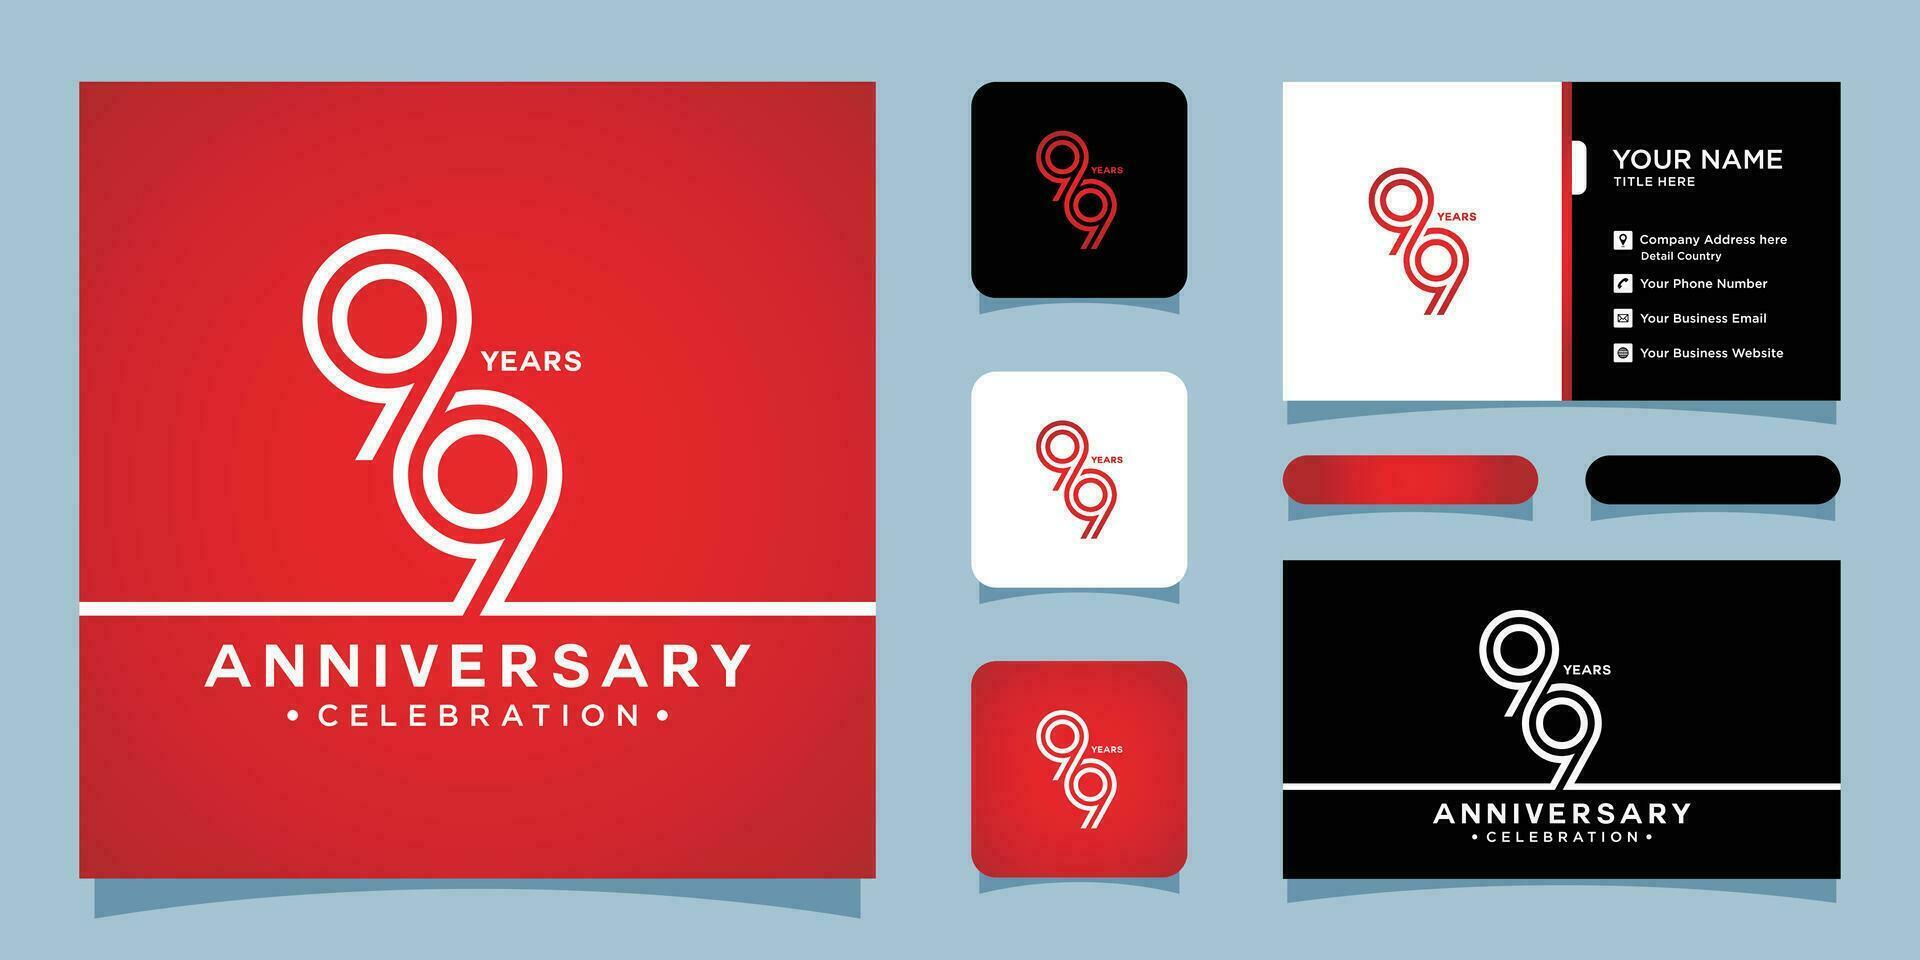 99 Years Anniversary Celebration, Number Vector Template with business card design Premium Vector